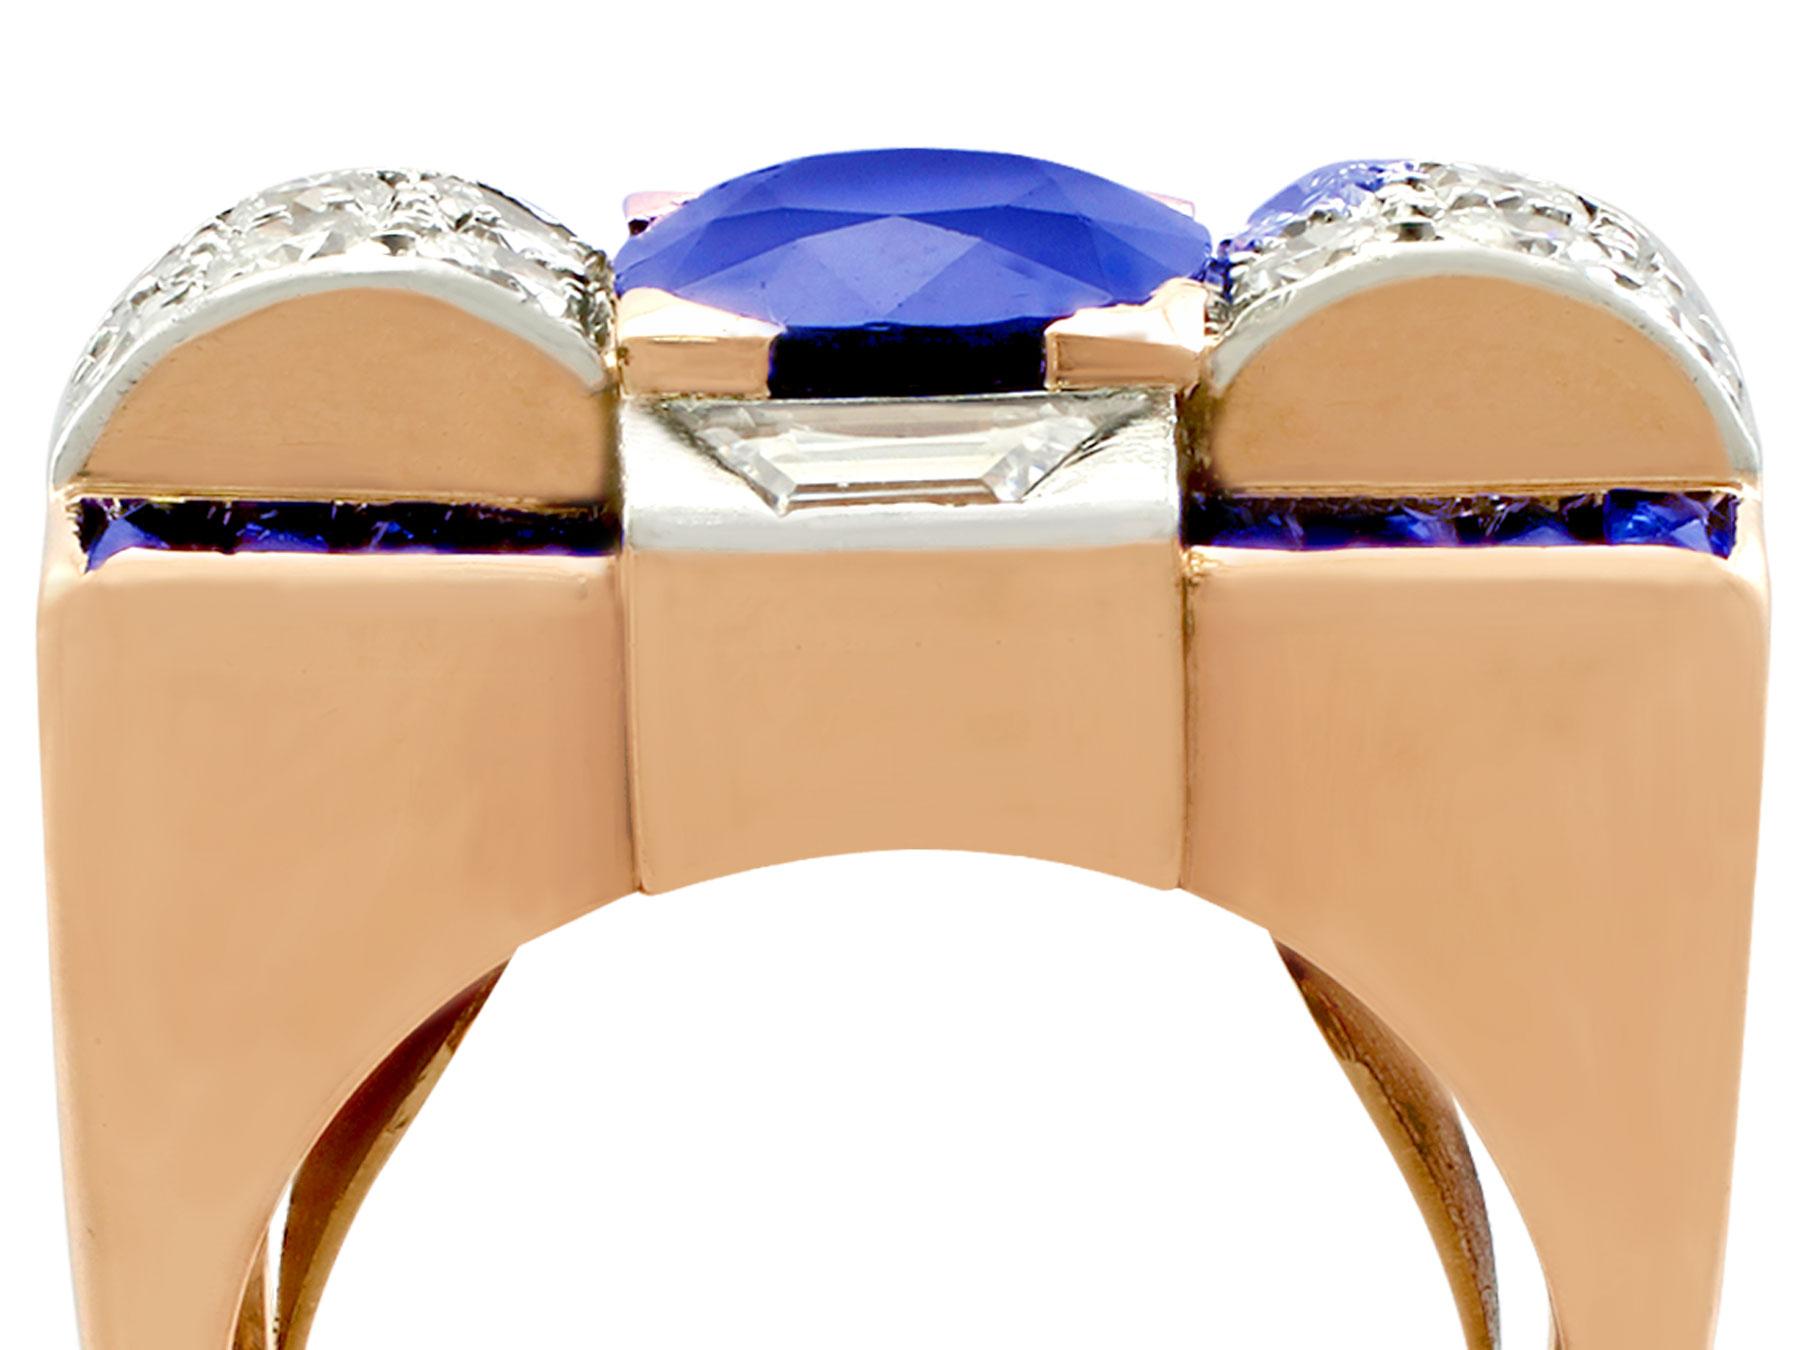 A stunning vintage Art Deco 3.72 carat sapphire and 1.20 carat diamond, 18 karat rose and white gold dress ring; part of our diverse gemstone estate jewelry collections

This stunning, fine and impressive Art Deco sapphire and diamond ring has been